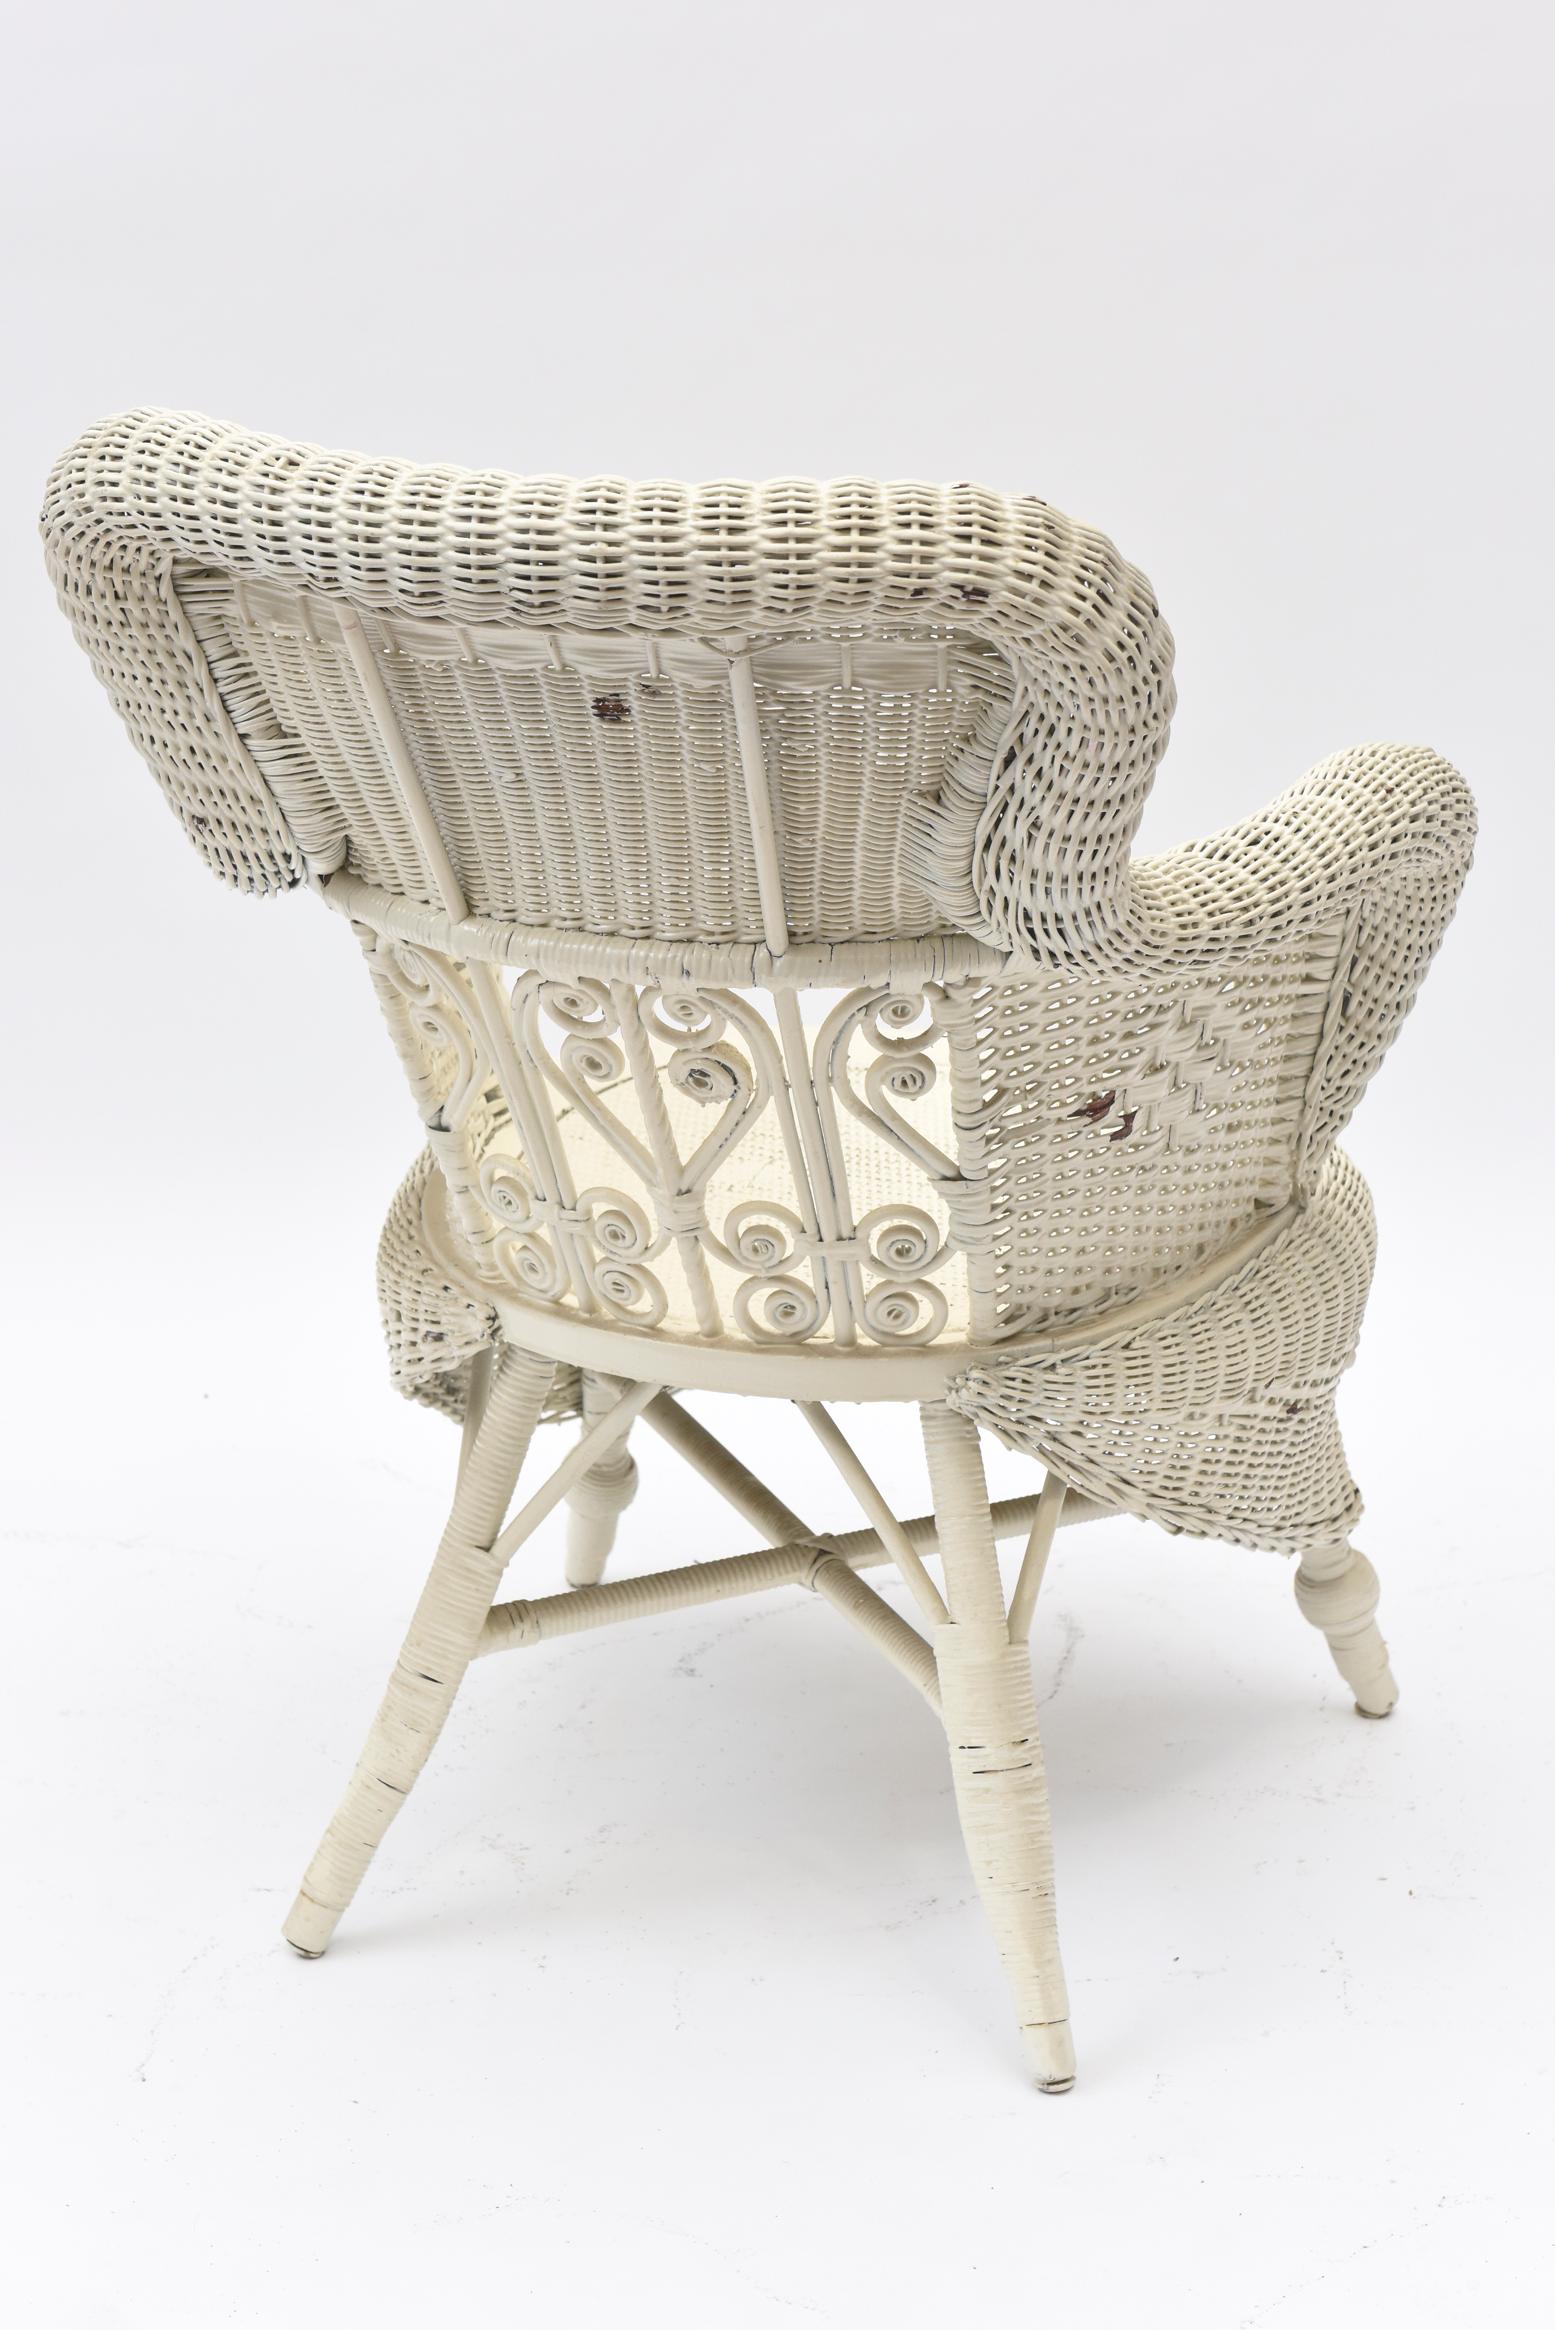 Woven Victorian Wicker Parlor Set ‘His, Her and Child's’ Chairs, Settee and Rocker For Sale